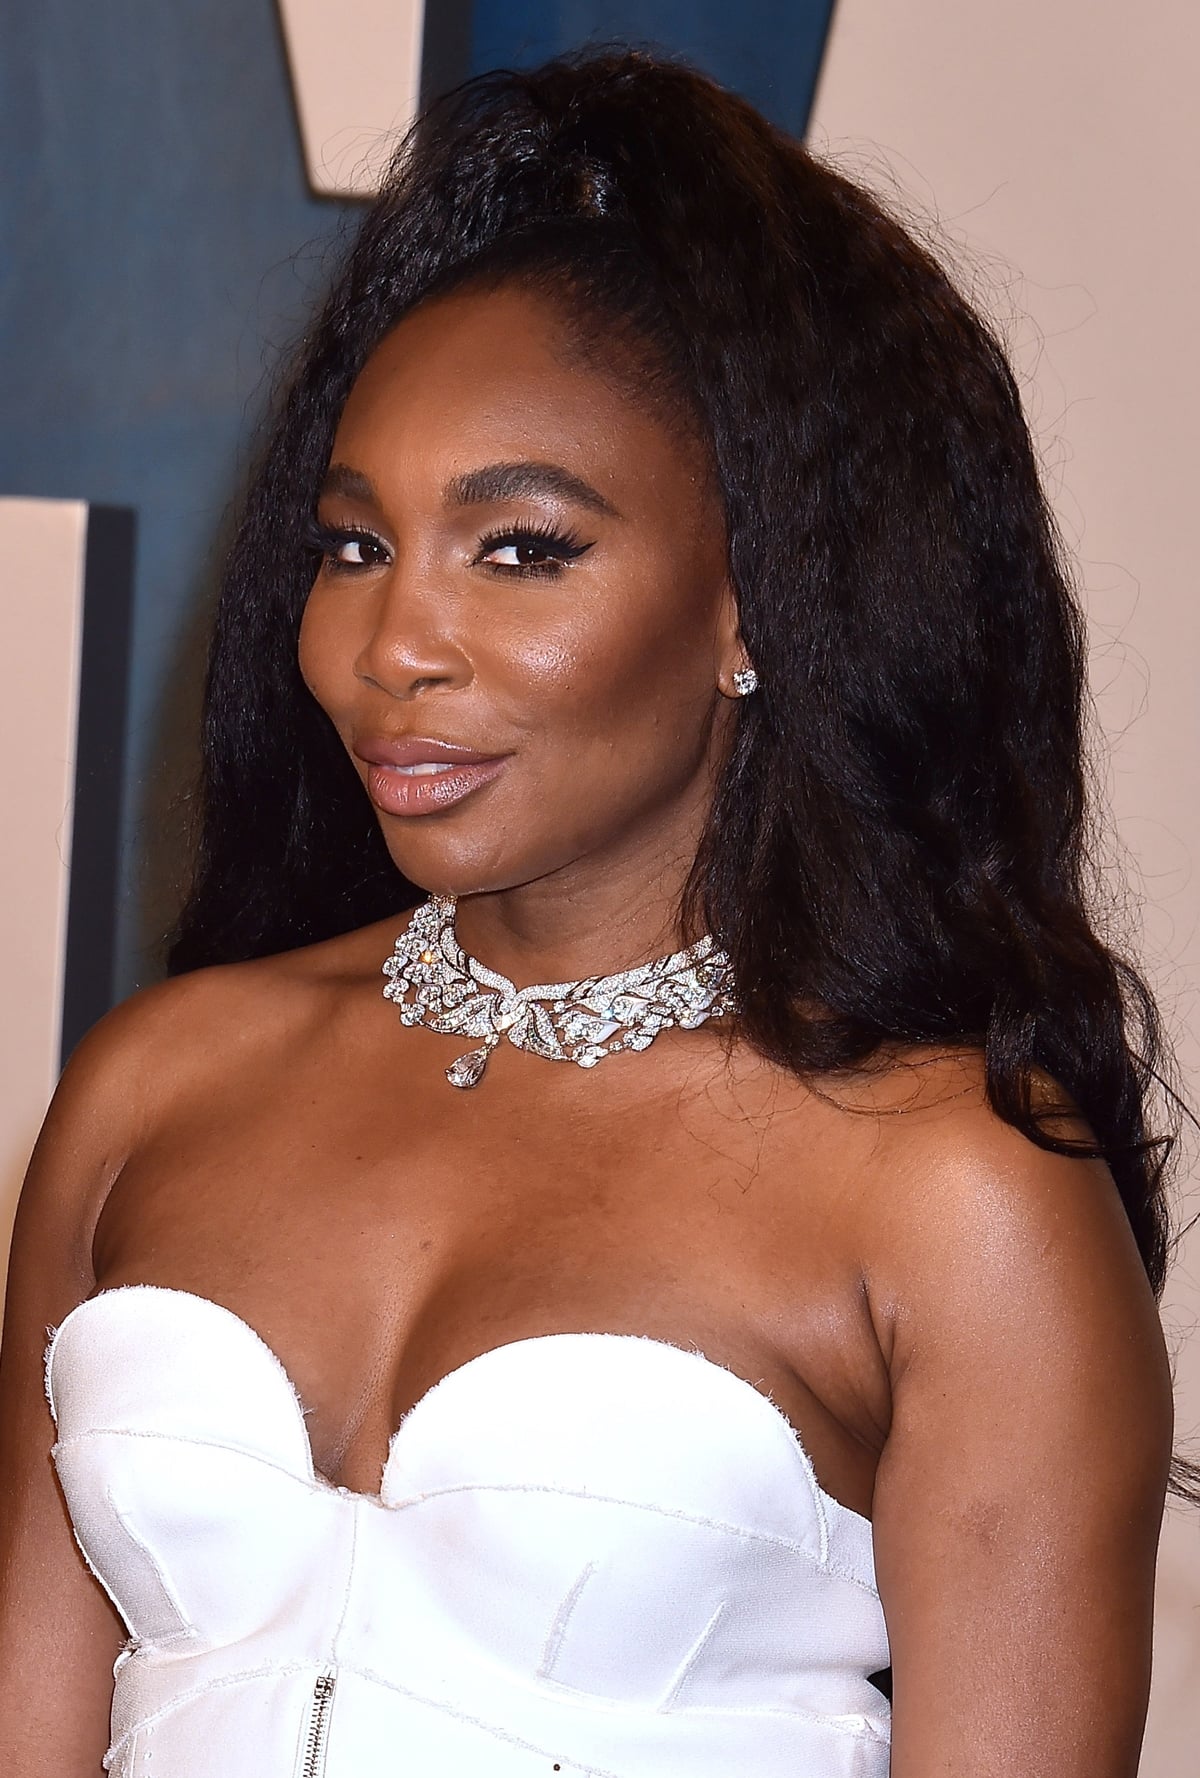 Venus Williams shows off her necklace comprised of over 77 carats of diamonds and mother-of-pearl elements